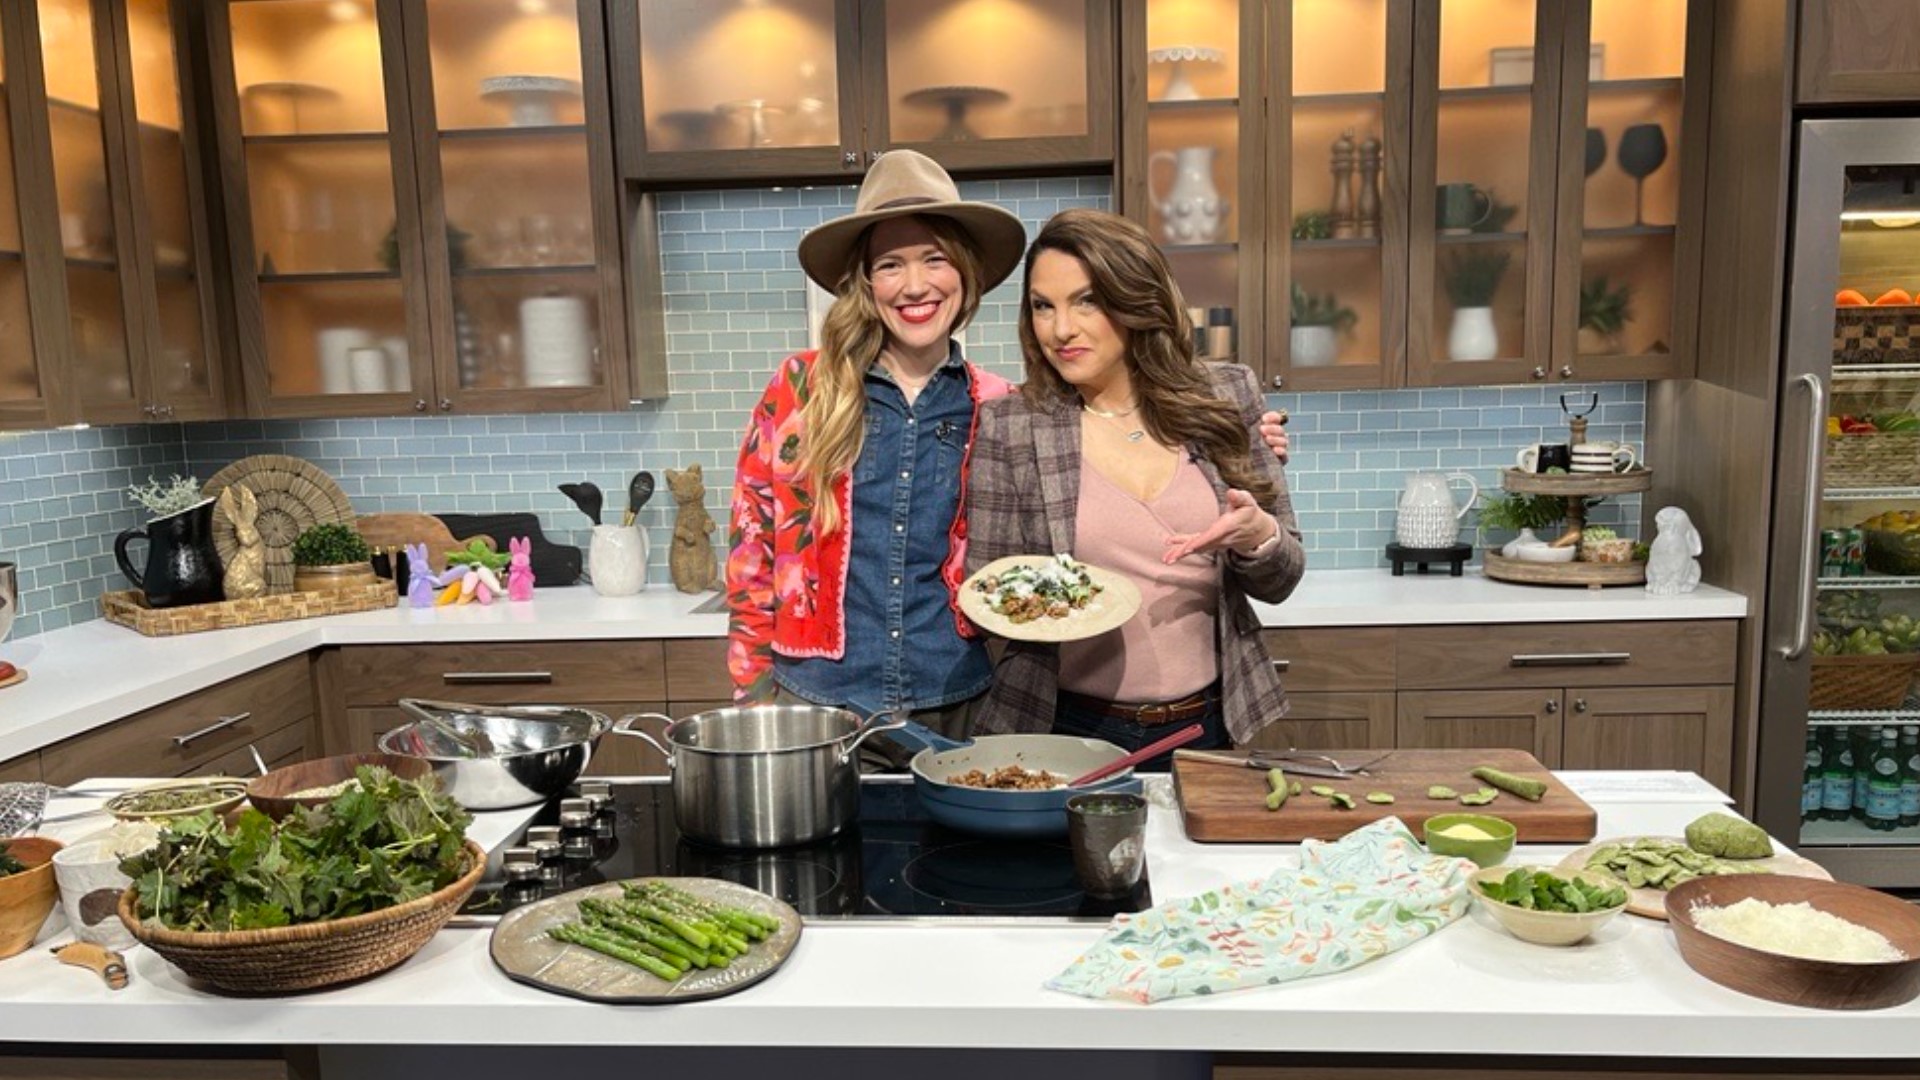 Cookbook author Ashley Rodriguez shares some delicious and healthy ways to use nettles in the kitchen. #newdaynw